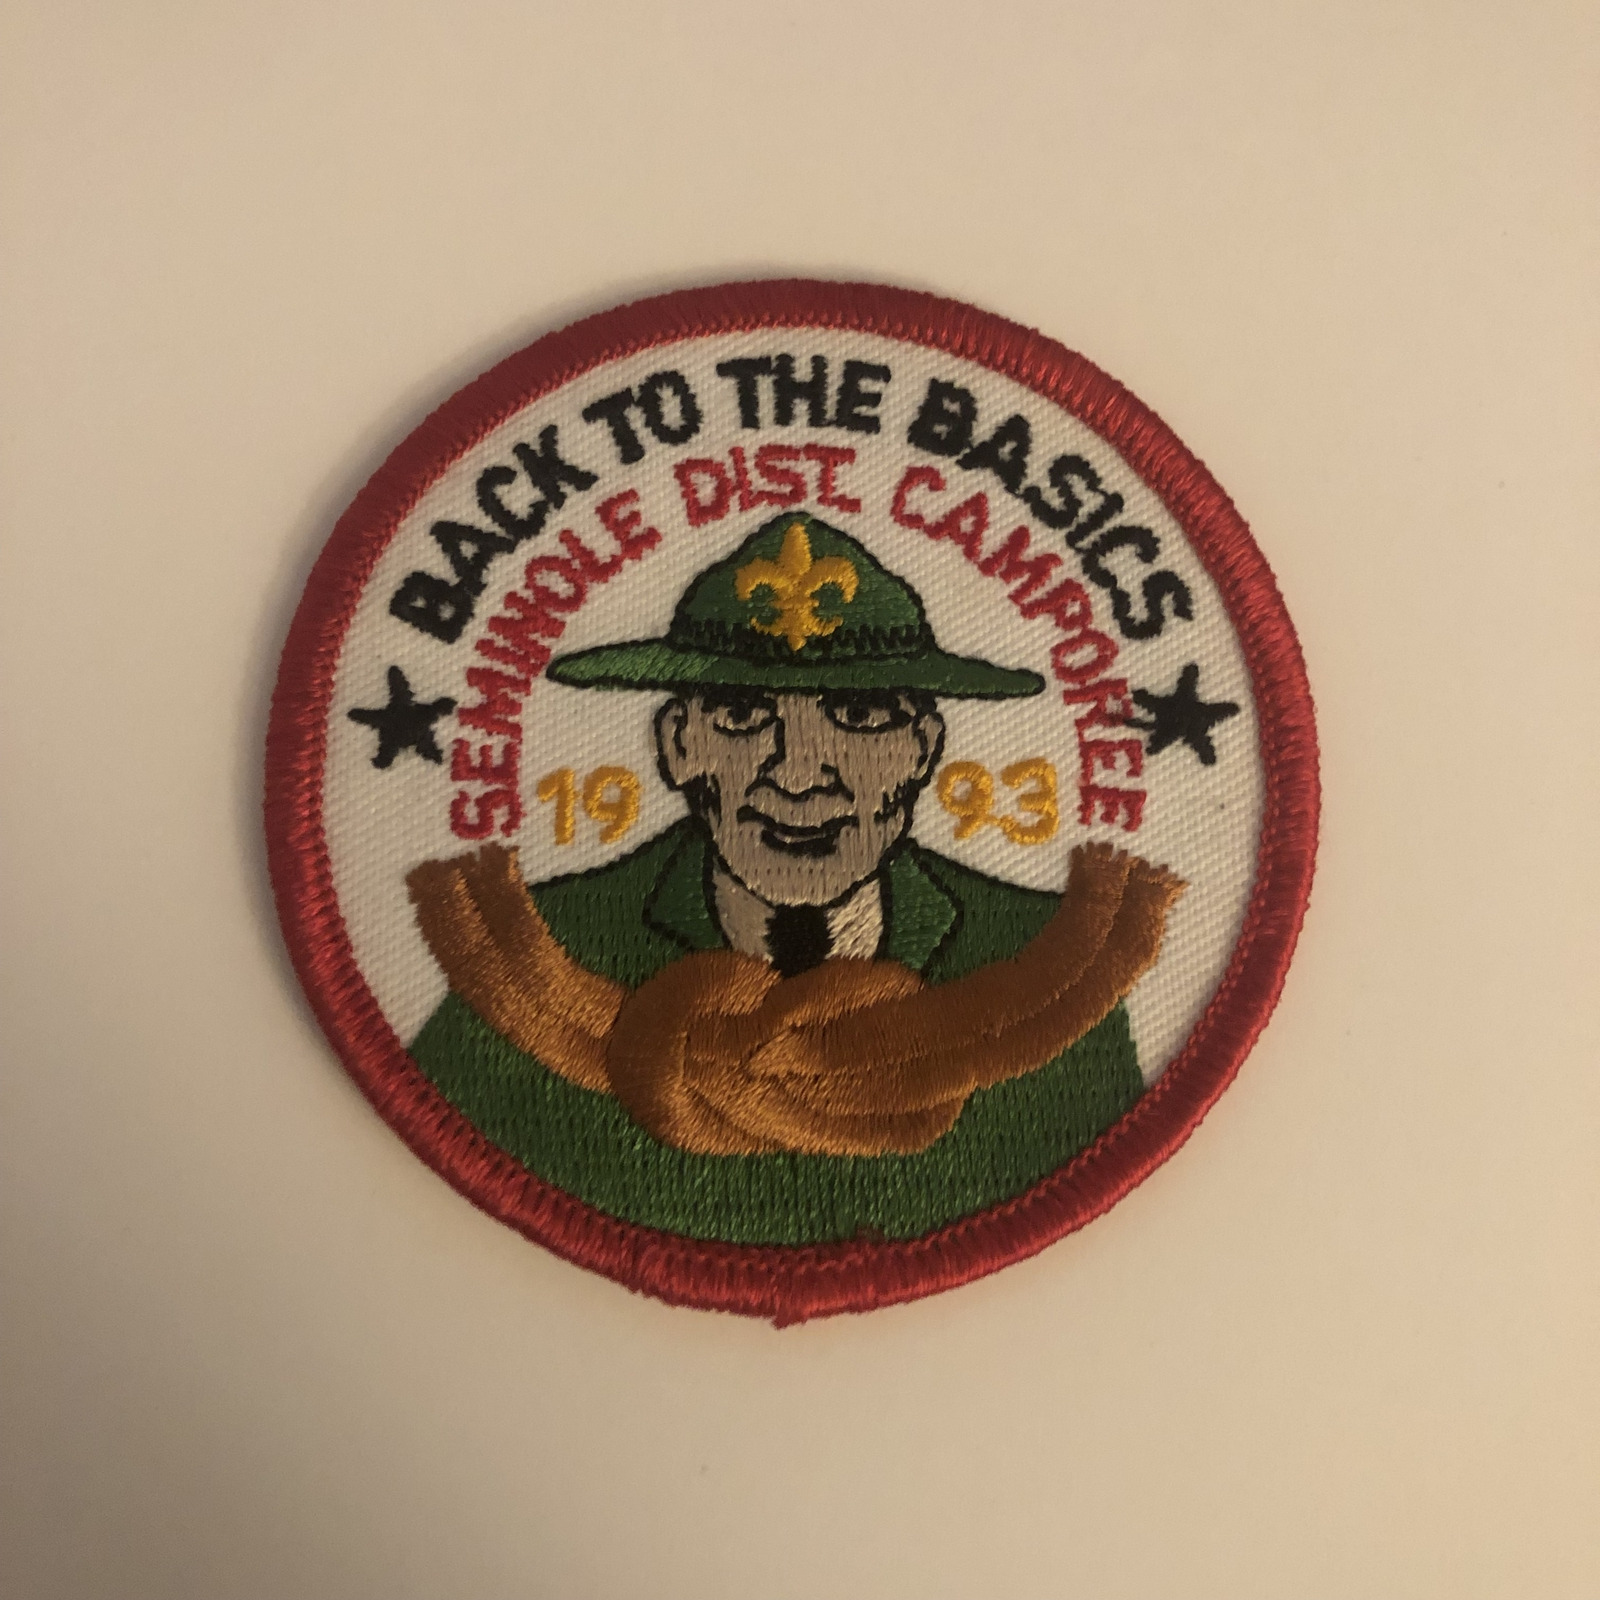 BSA BOY SCOUTS BACK TO THE BASICS PATCH SEMINOLE DIST CAMPOREE 1993